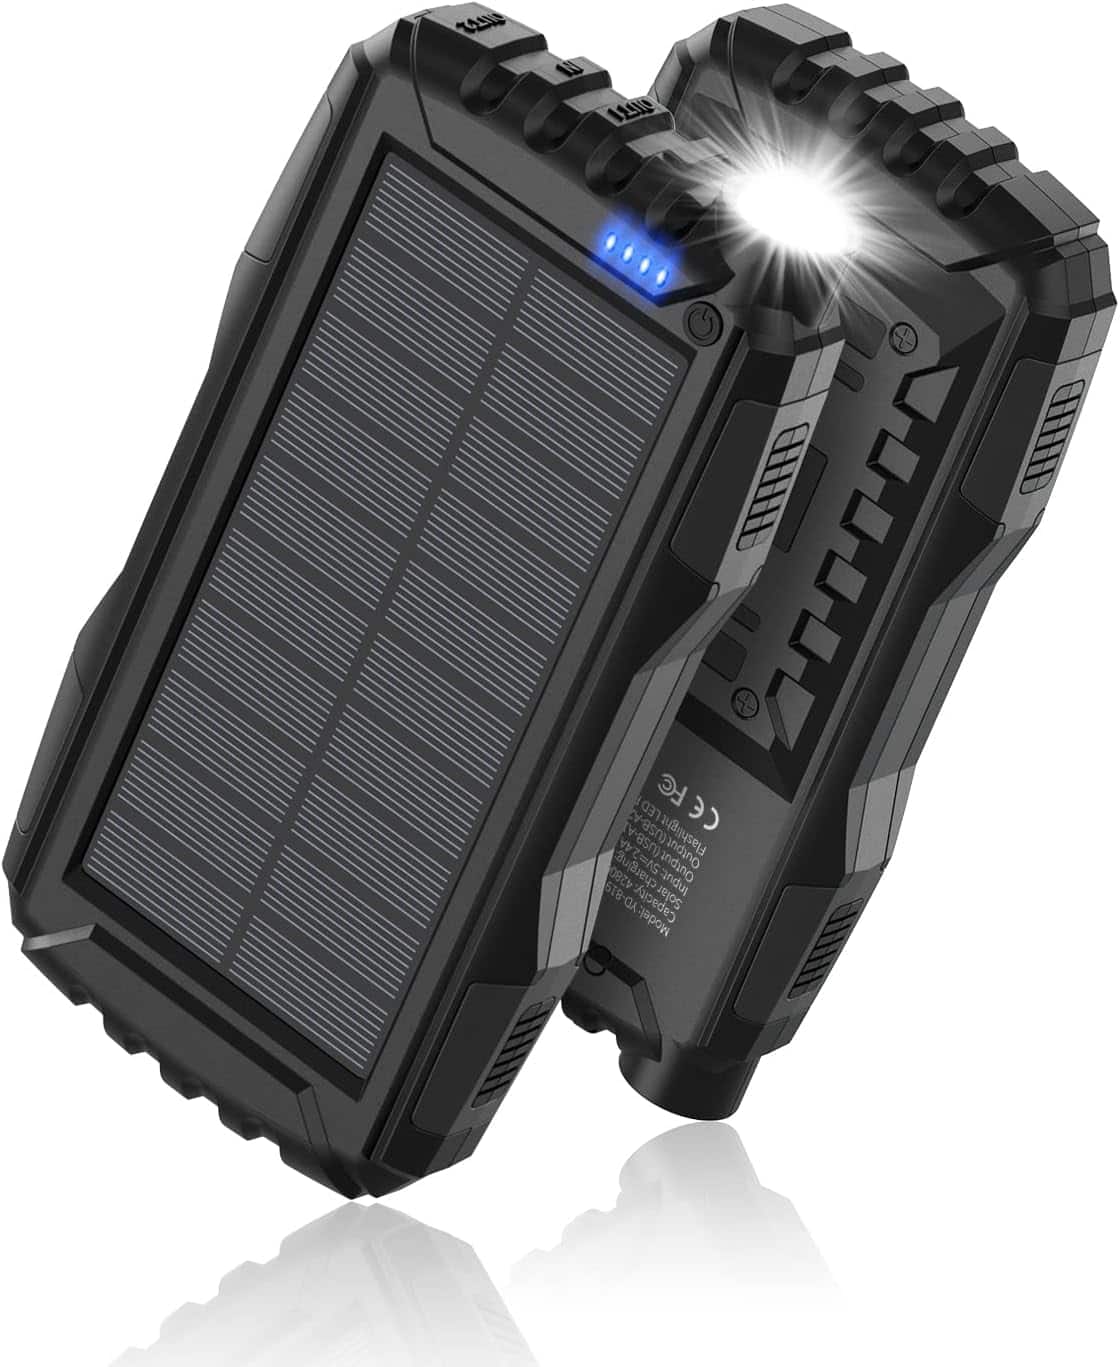 Power-Bank-Solar-Charger